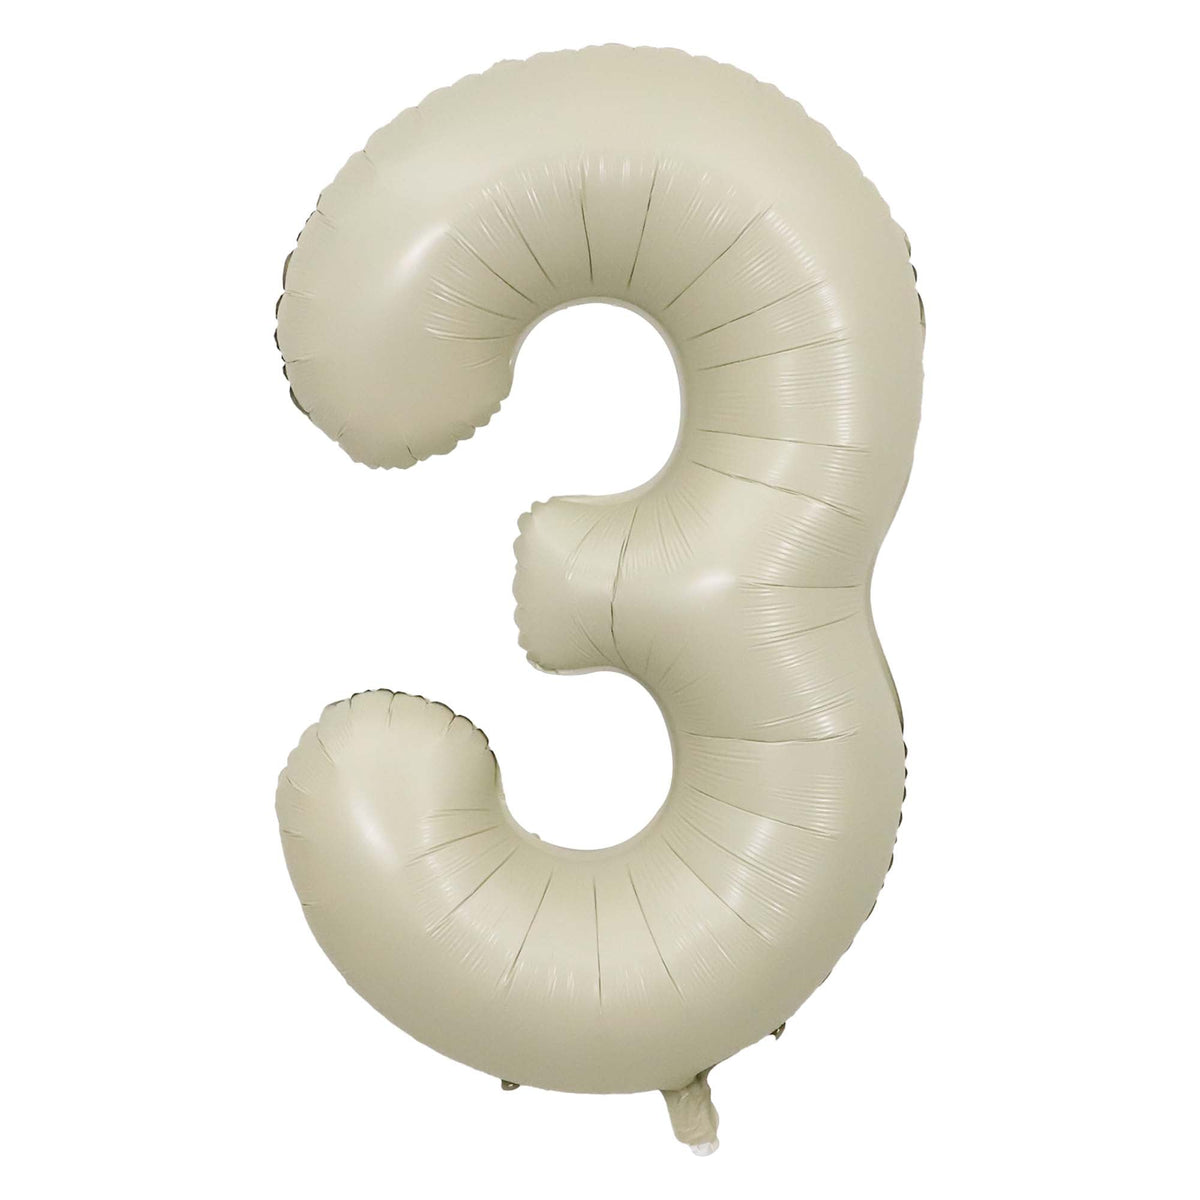 PARTYGRAM Balloons Ivory Number 3 Foil Balloon, Creamy White Matte Finish, 34 Inches 810077658277